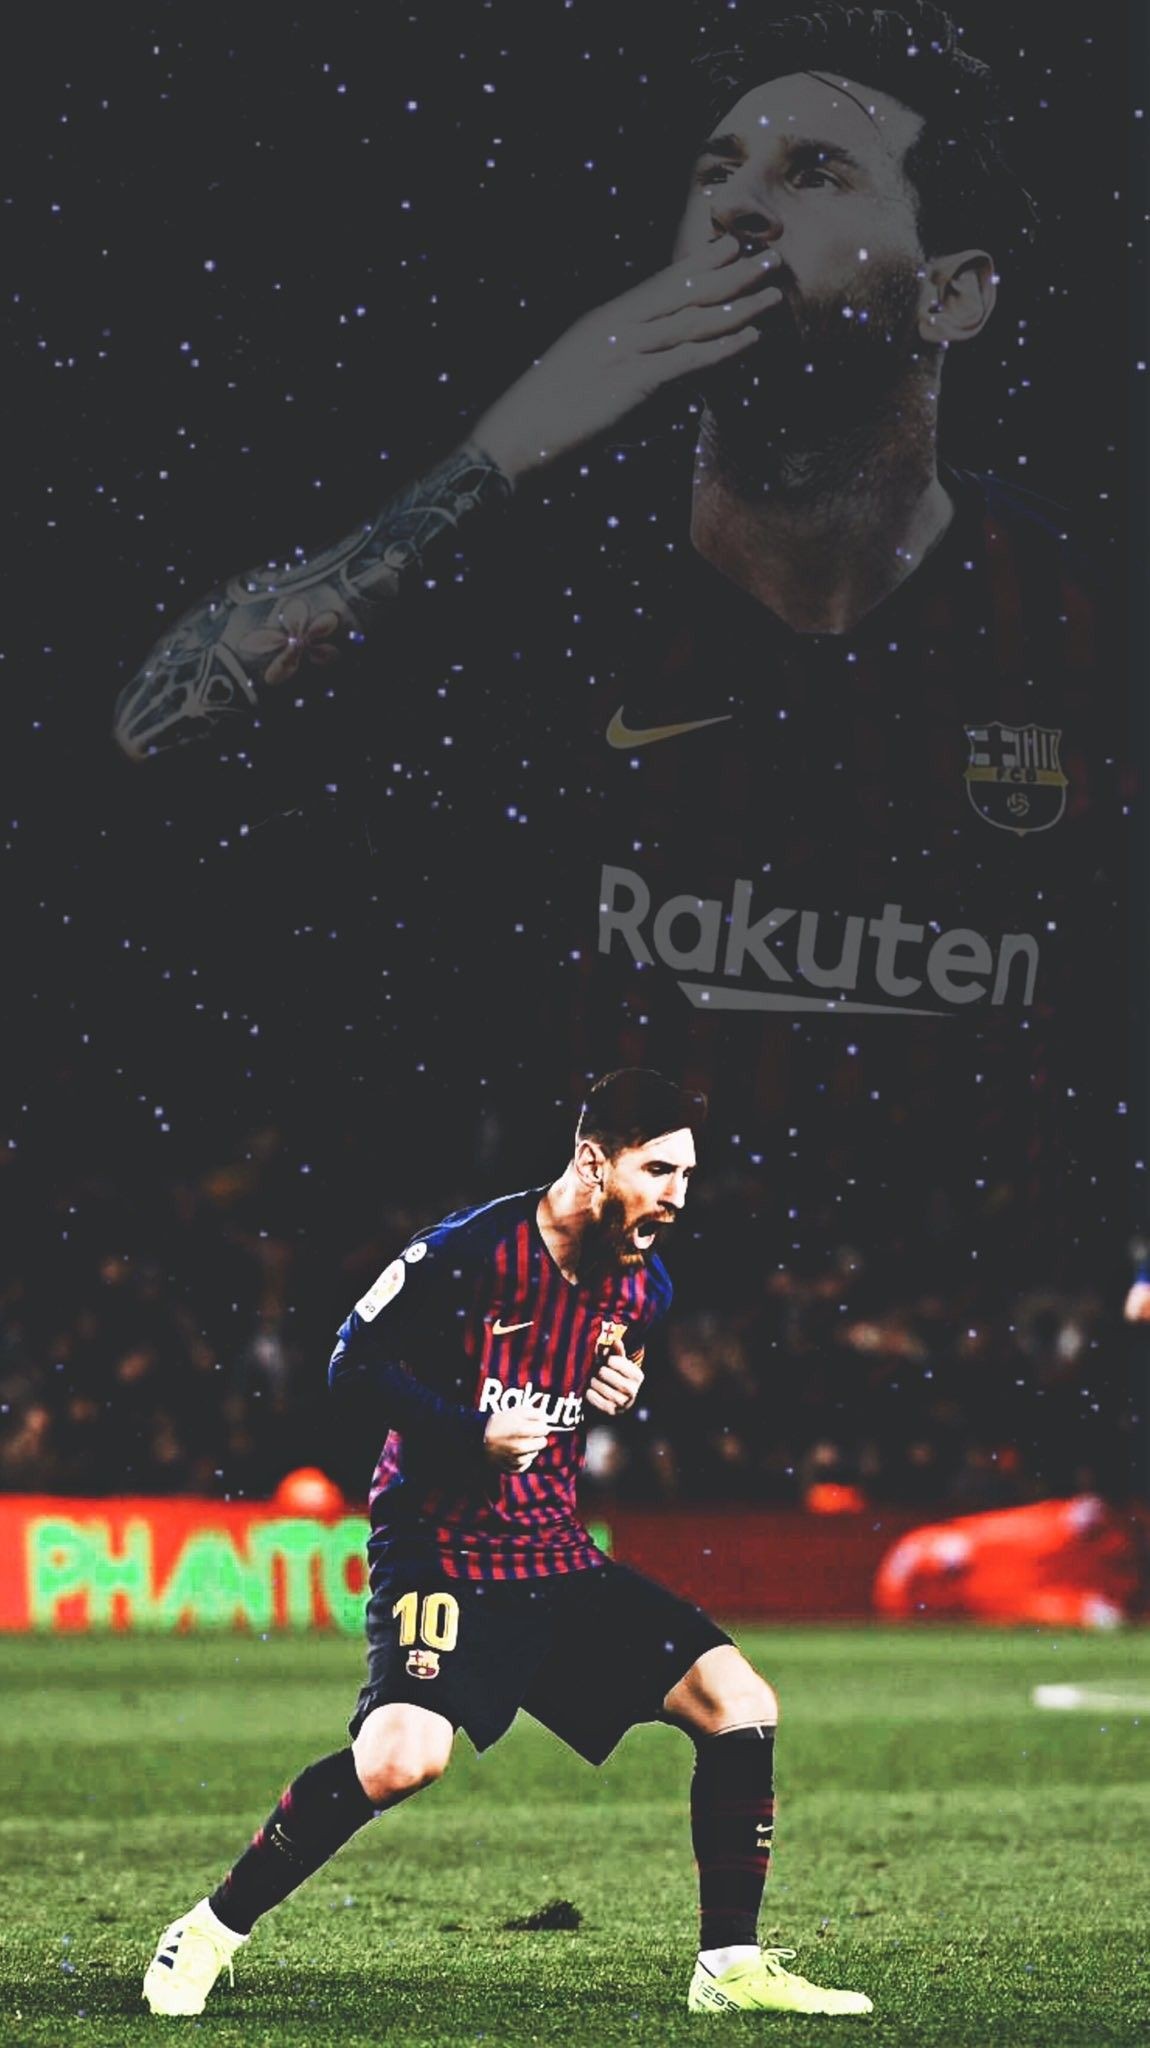 messi wallpaper for free download in hd